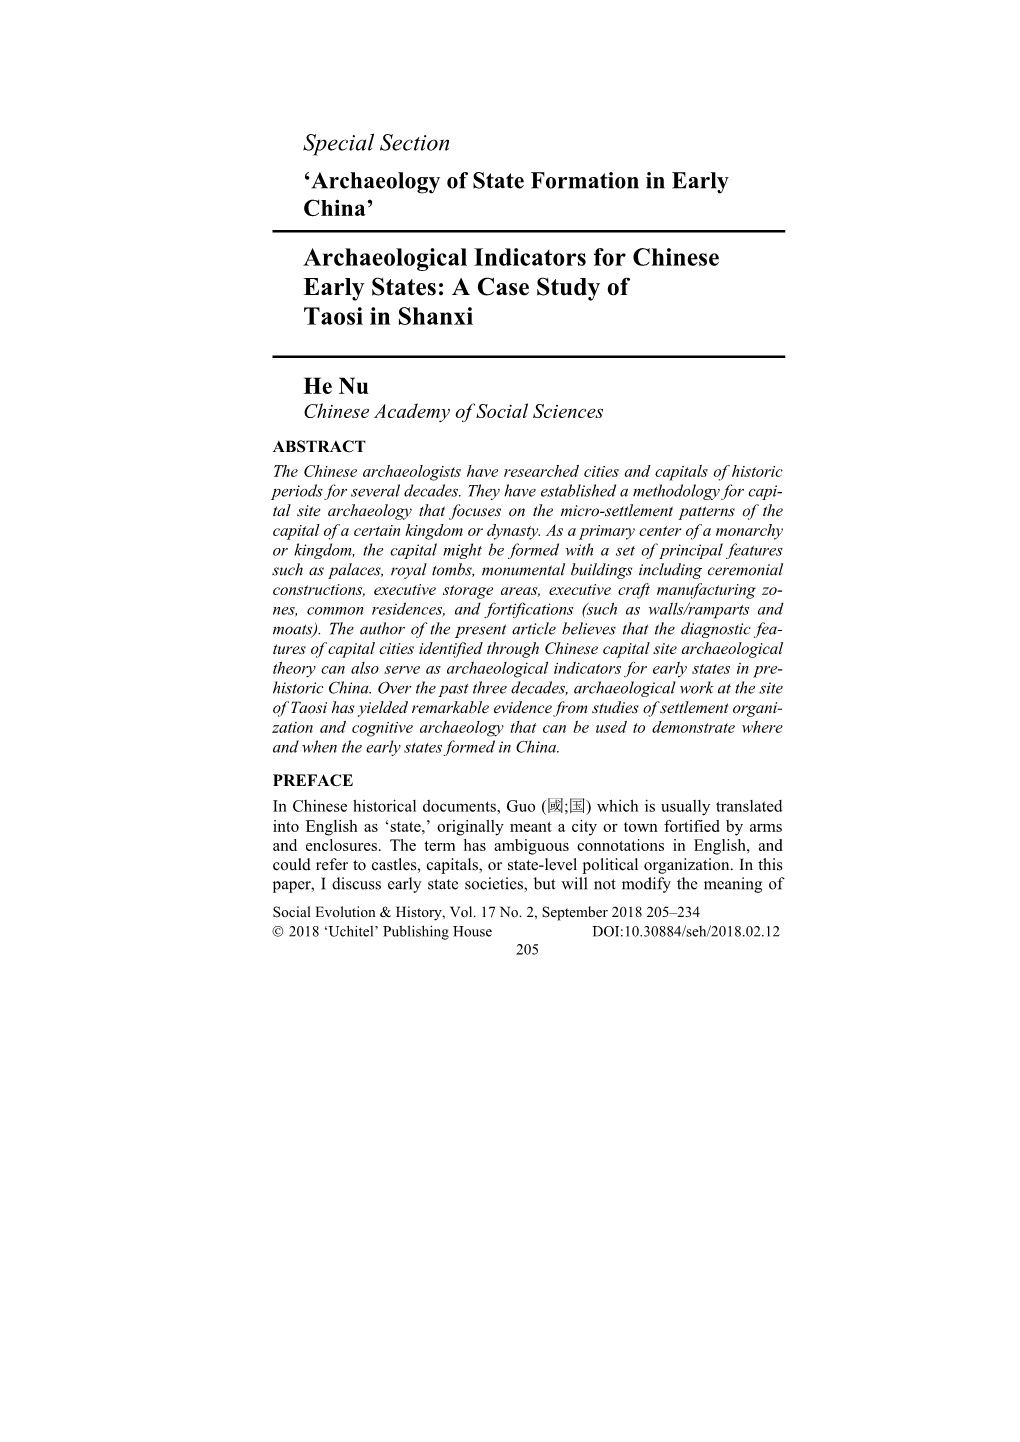 Archaeological Indicators for Chinese Early States: a Case Study of Taosi in Shanxi